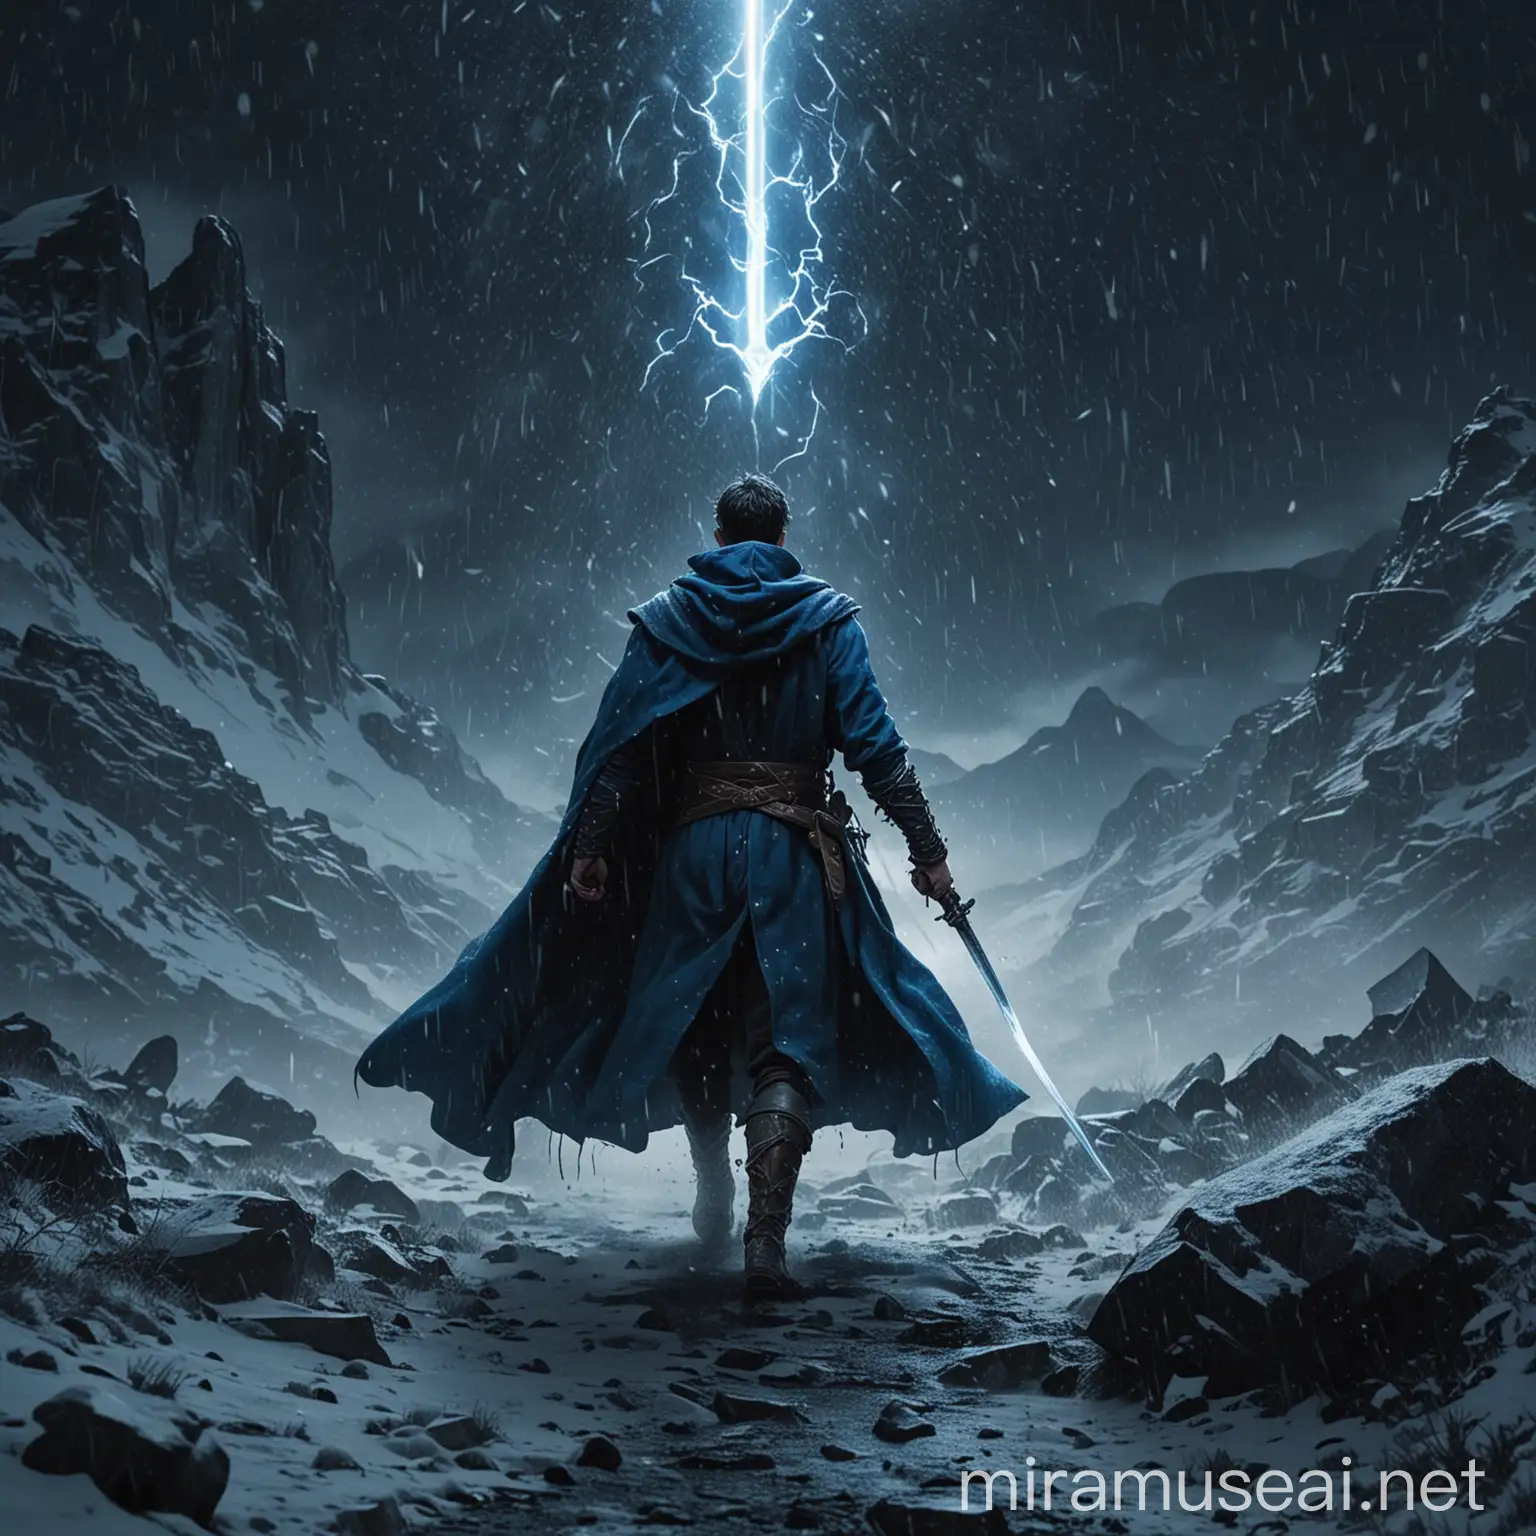 A very dark and confronting image of a thin young man, wearing a blue cloak, walking in the mountains, at night, in a blizzard, a sword strapped to his back, Mjolnir swirling around him in dim light like an electron in an atom